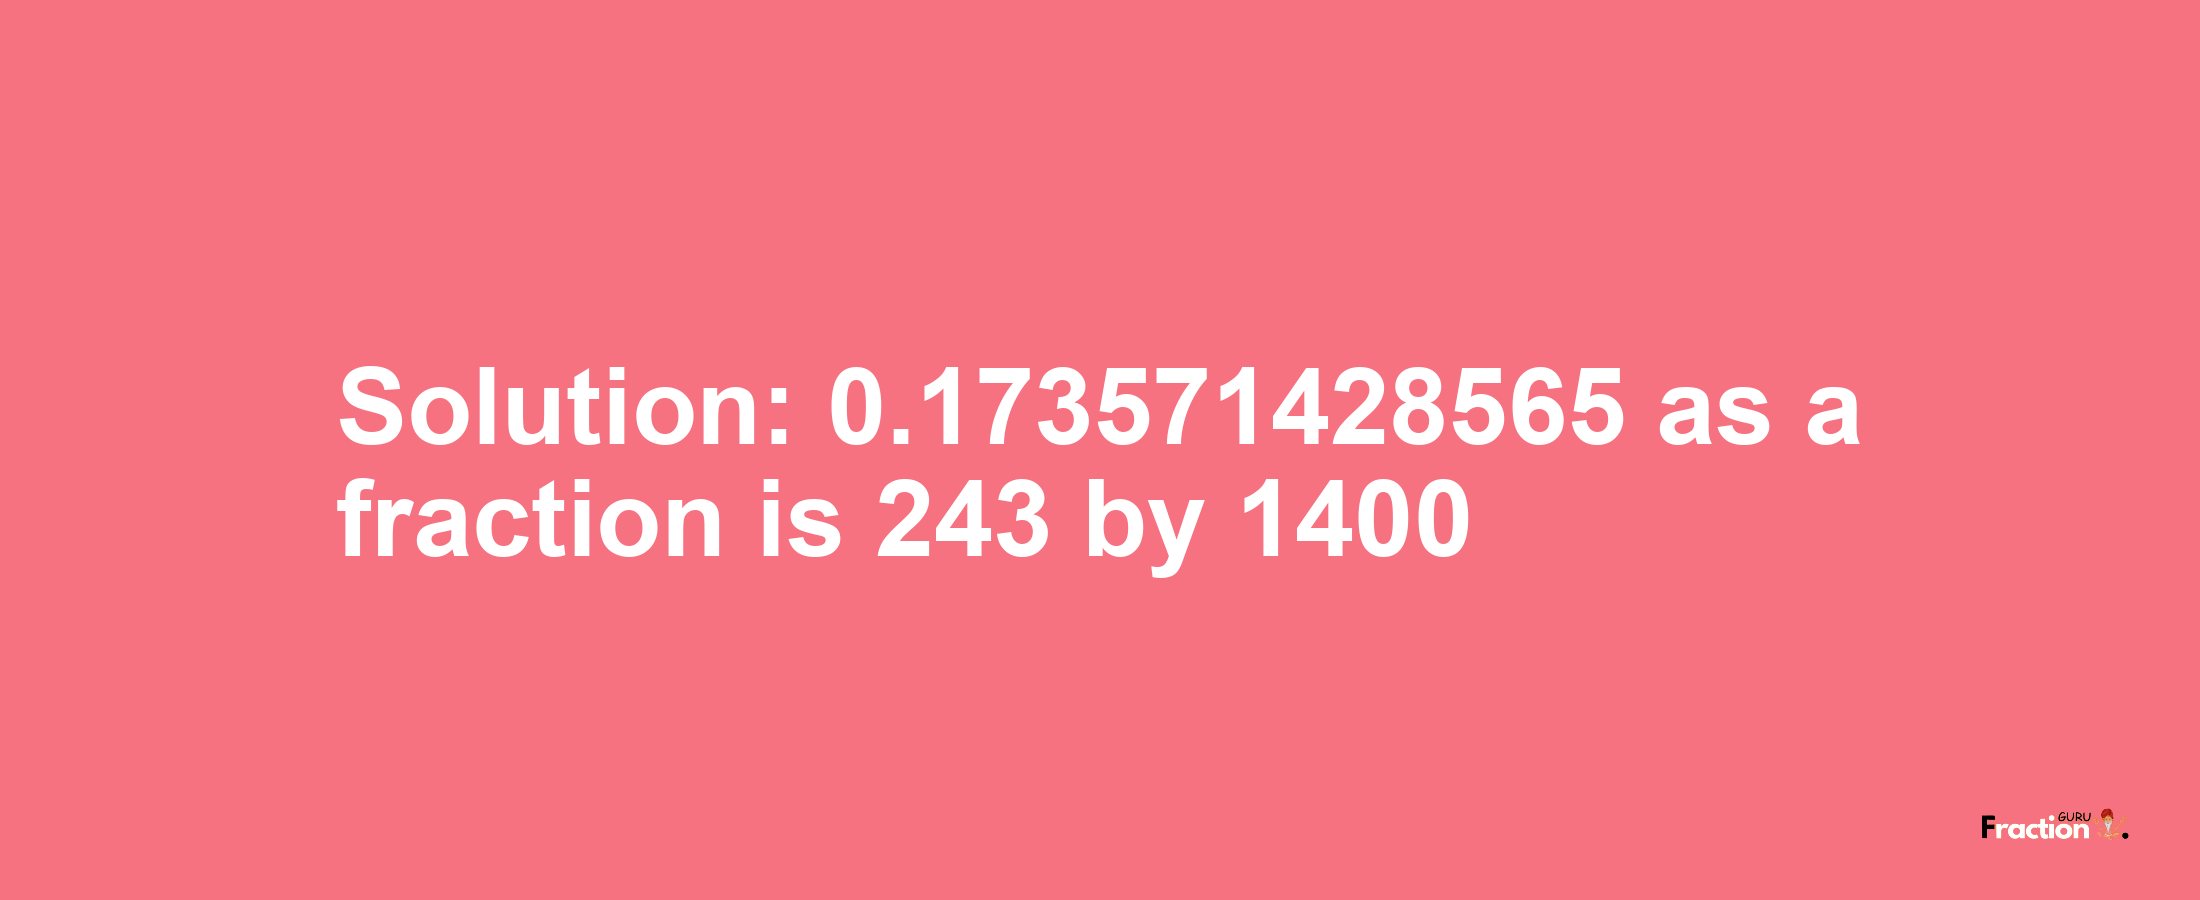 Solution:0.173571428565 as a fraction is 243/1400